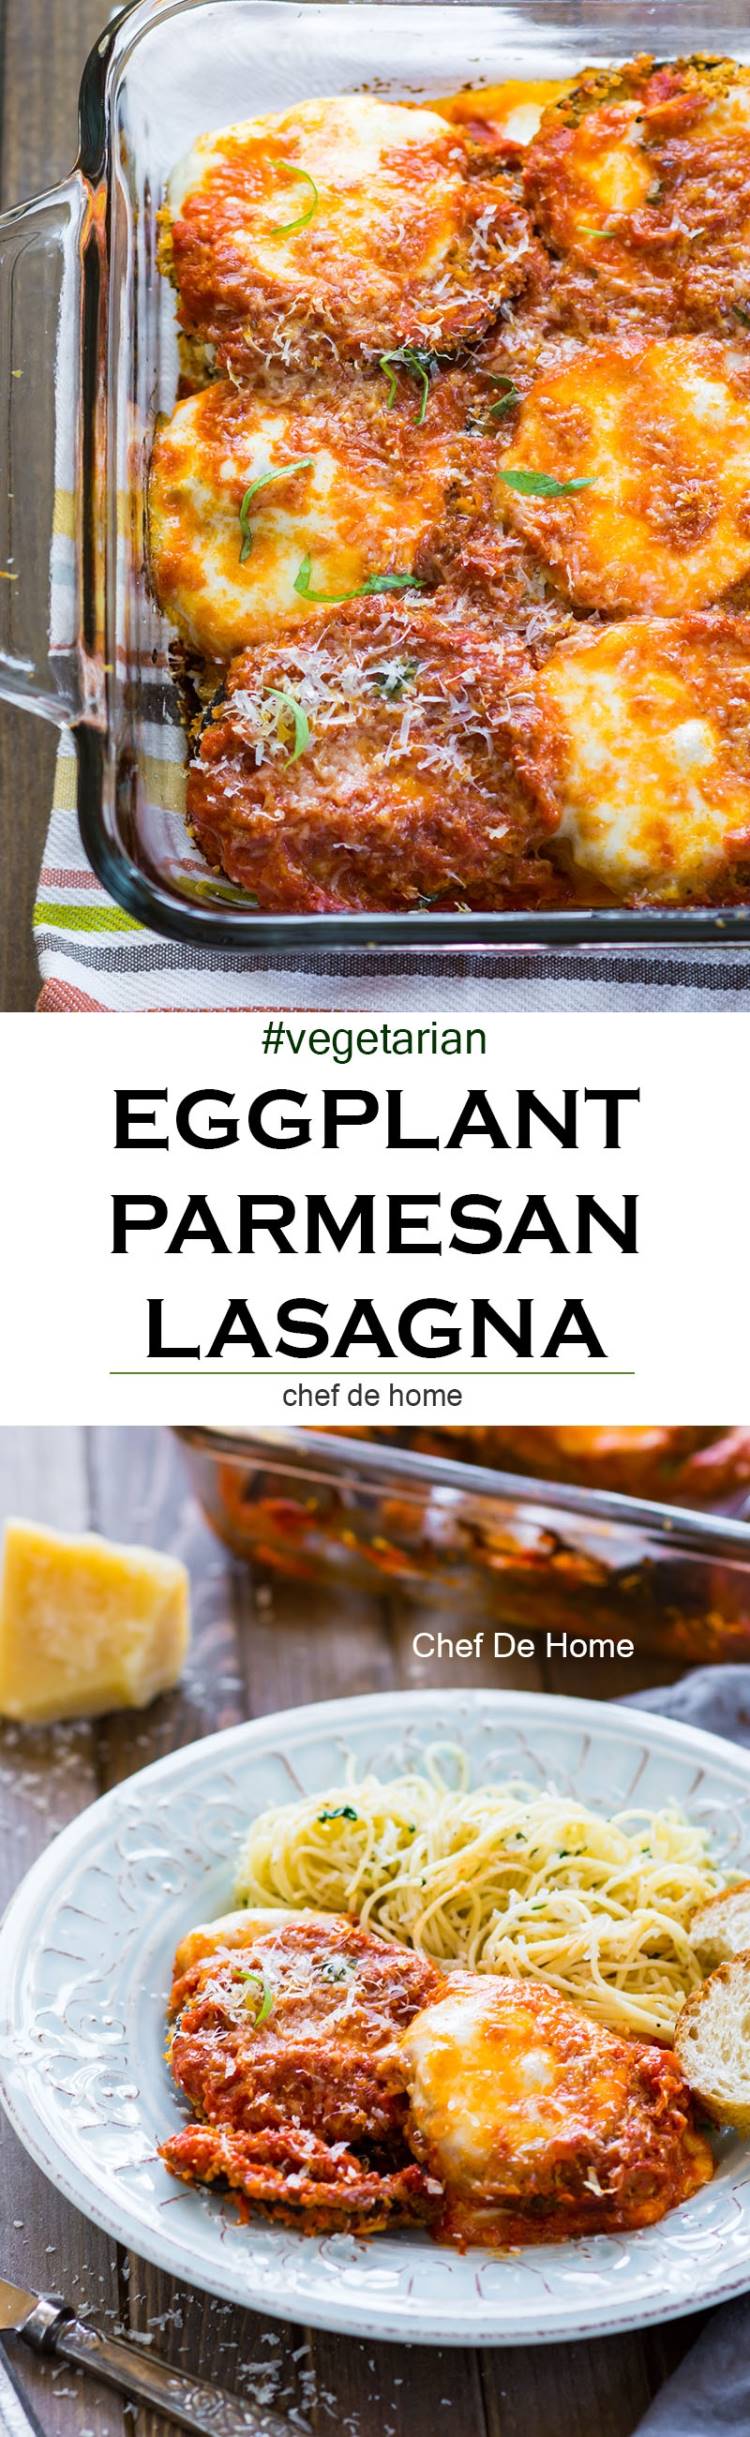 Eggplant Parmesan Lasagna Casserole with easy to follow step by step recipe | chefdehome.com